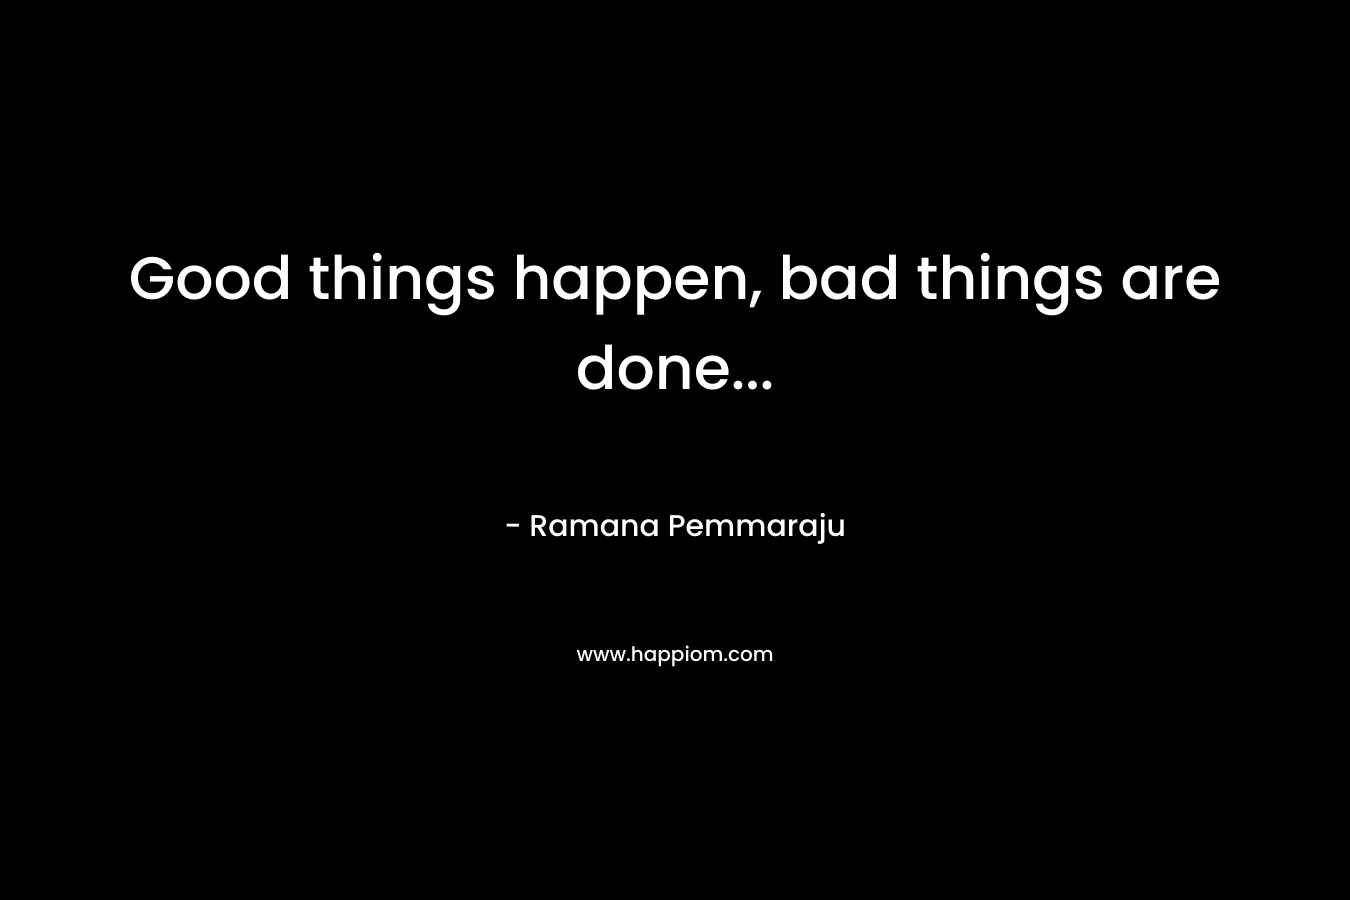 Good things happen, bad things are done...